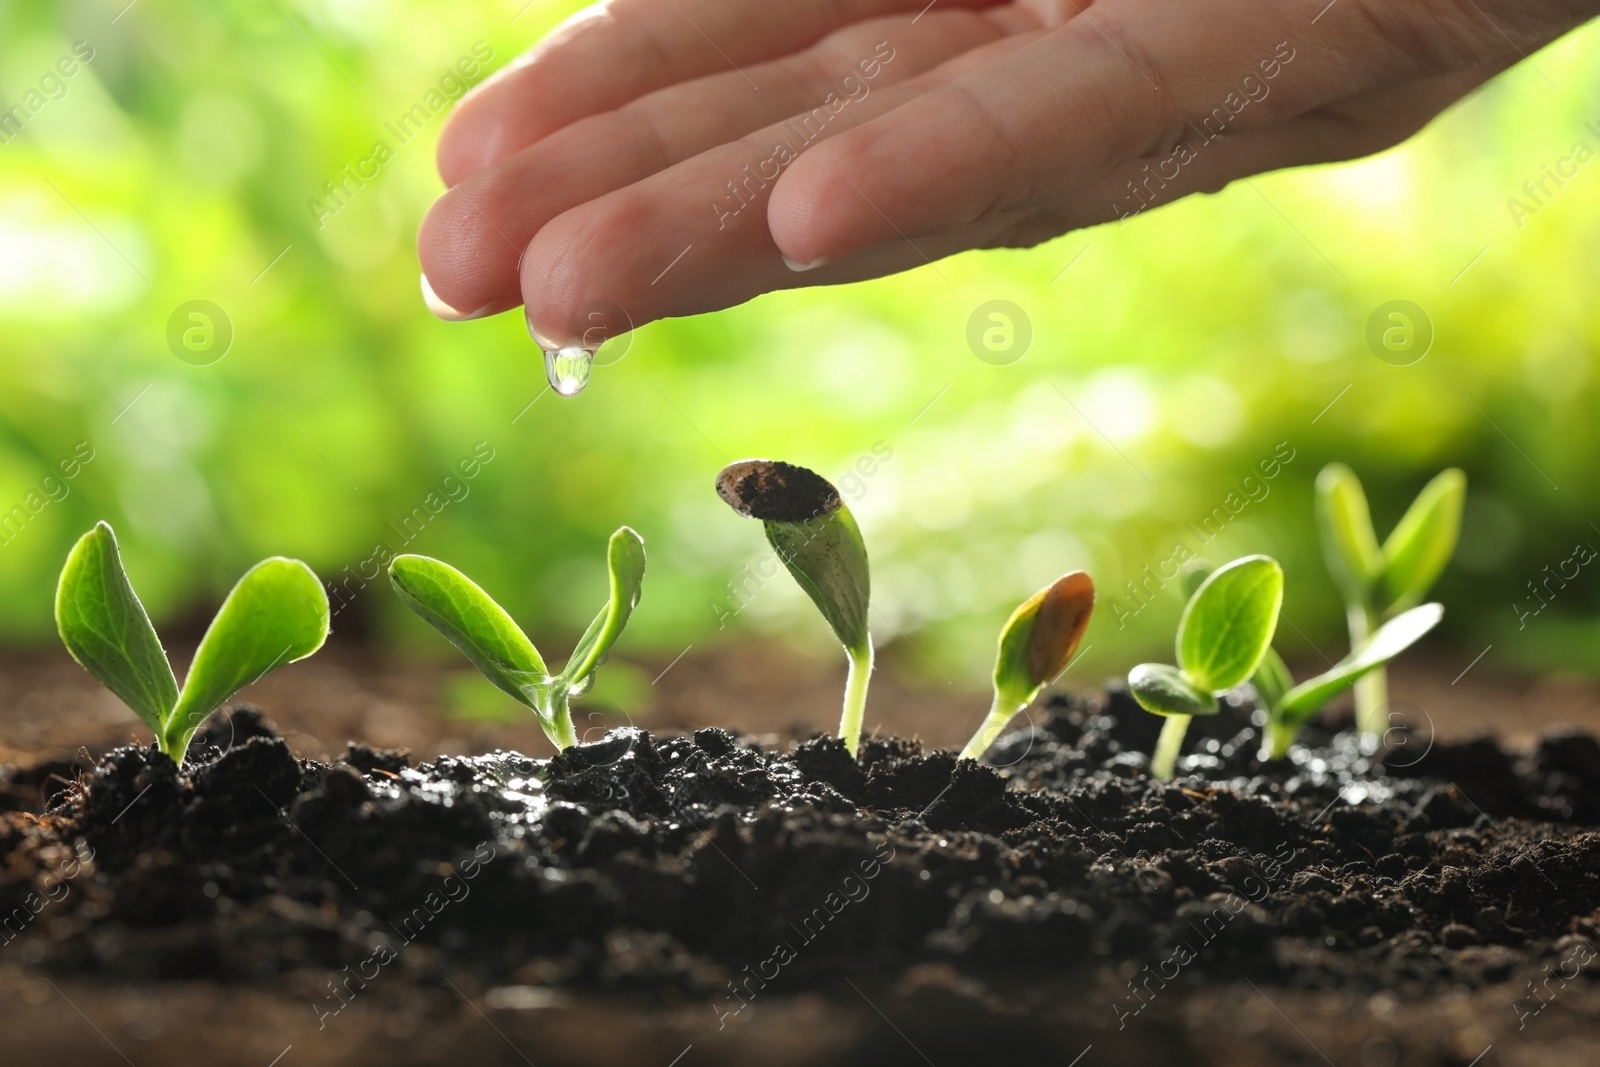 Photo of Woman watering young vegetable seedlings outdoors, closeup